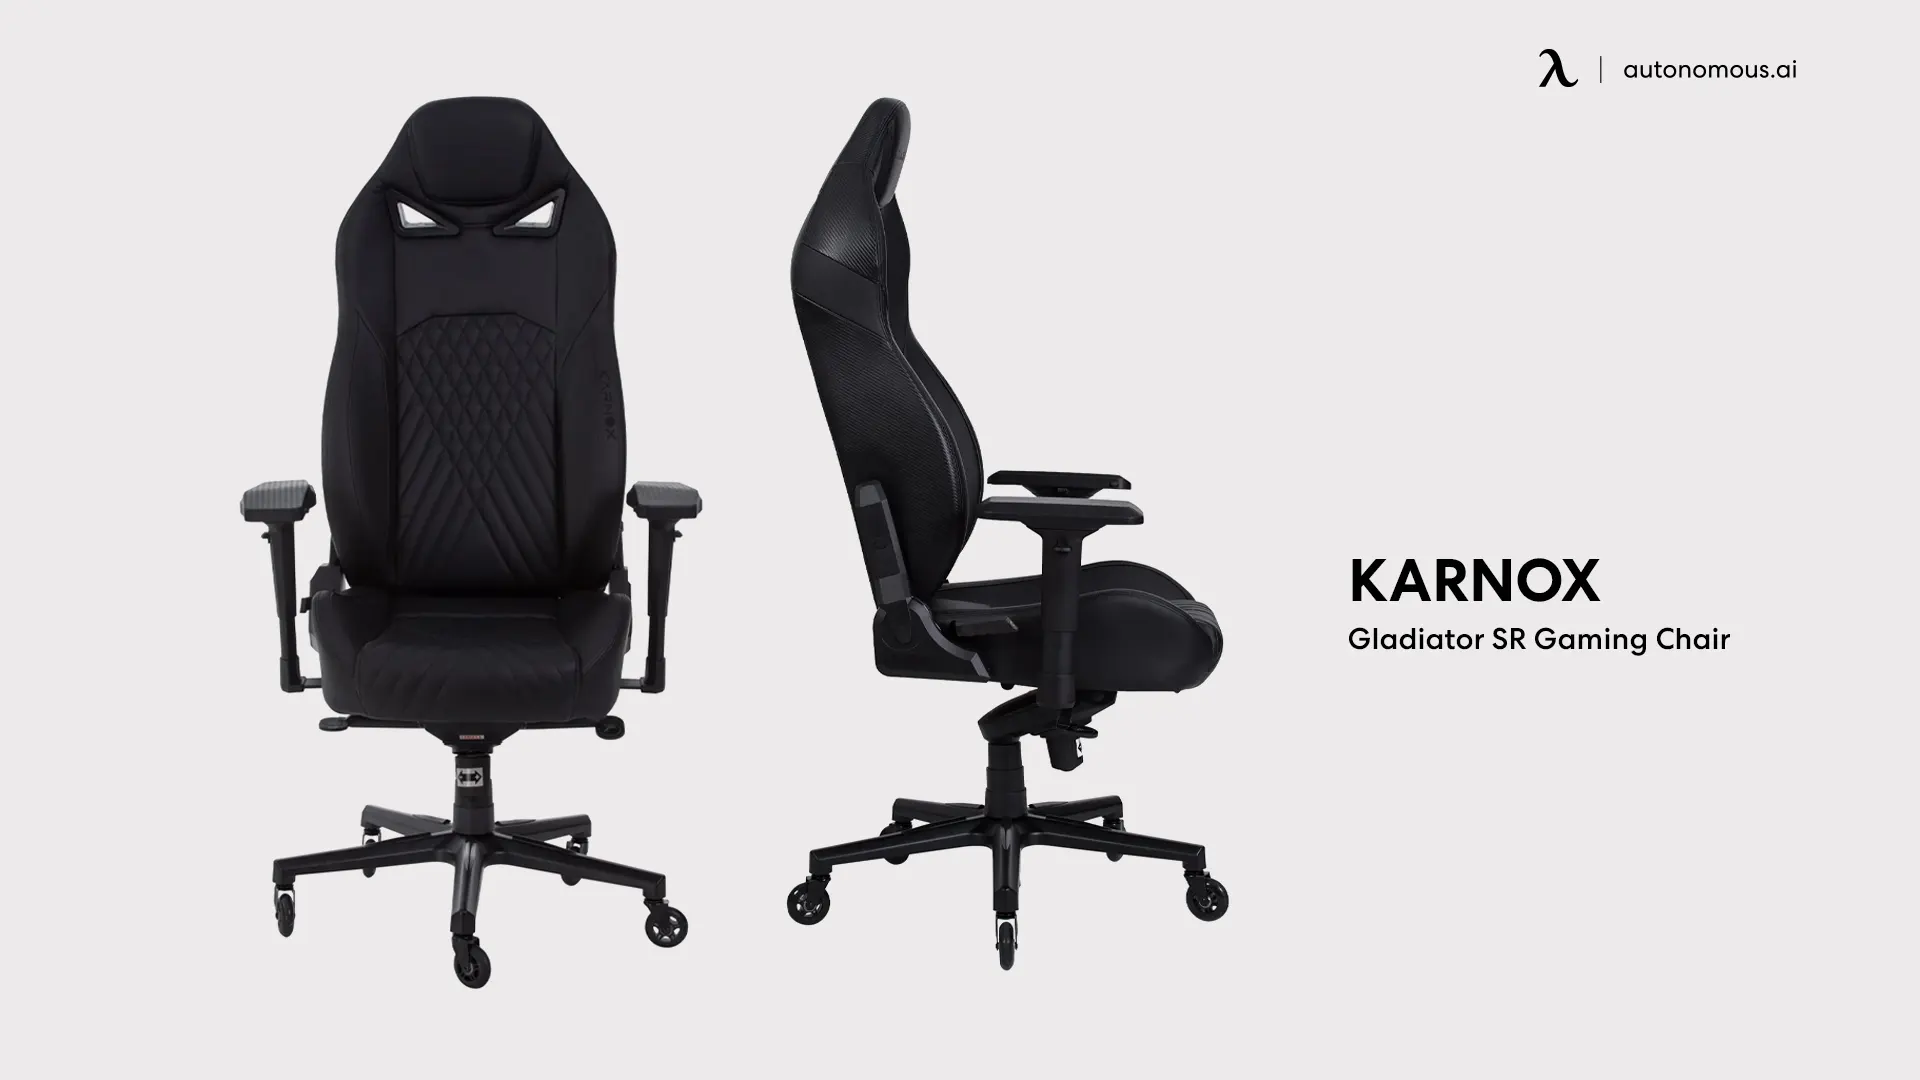 Karnox Gladiator SR Gaming Chair - office chairs 400 lbs weight capacity